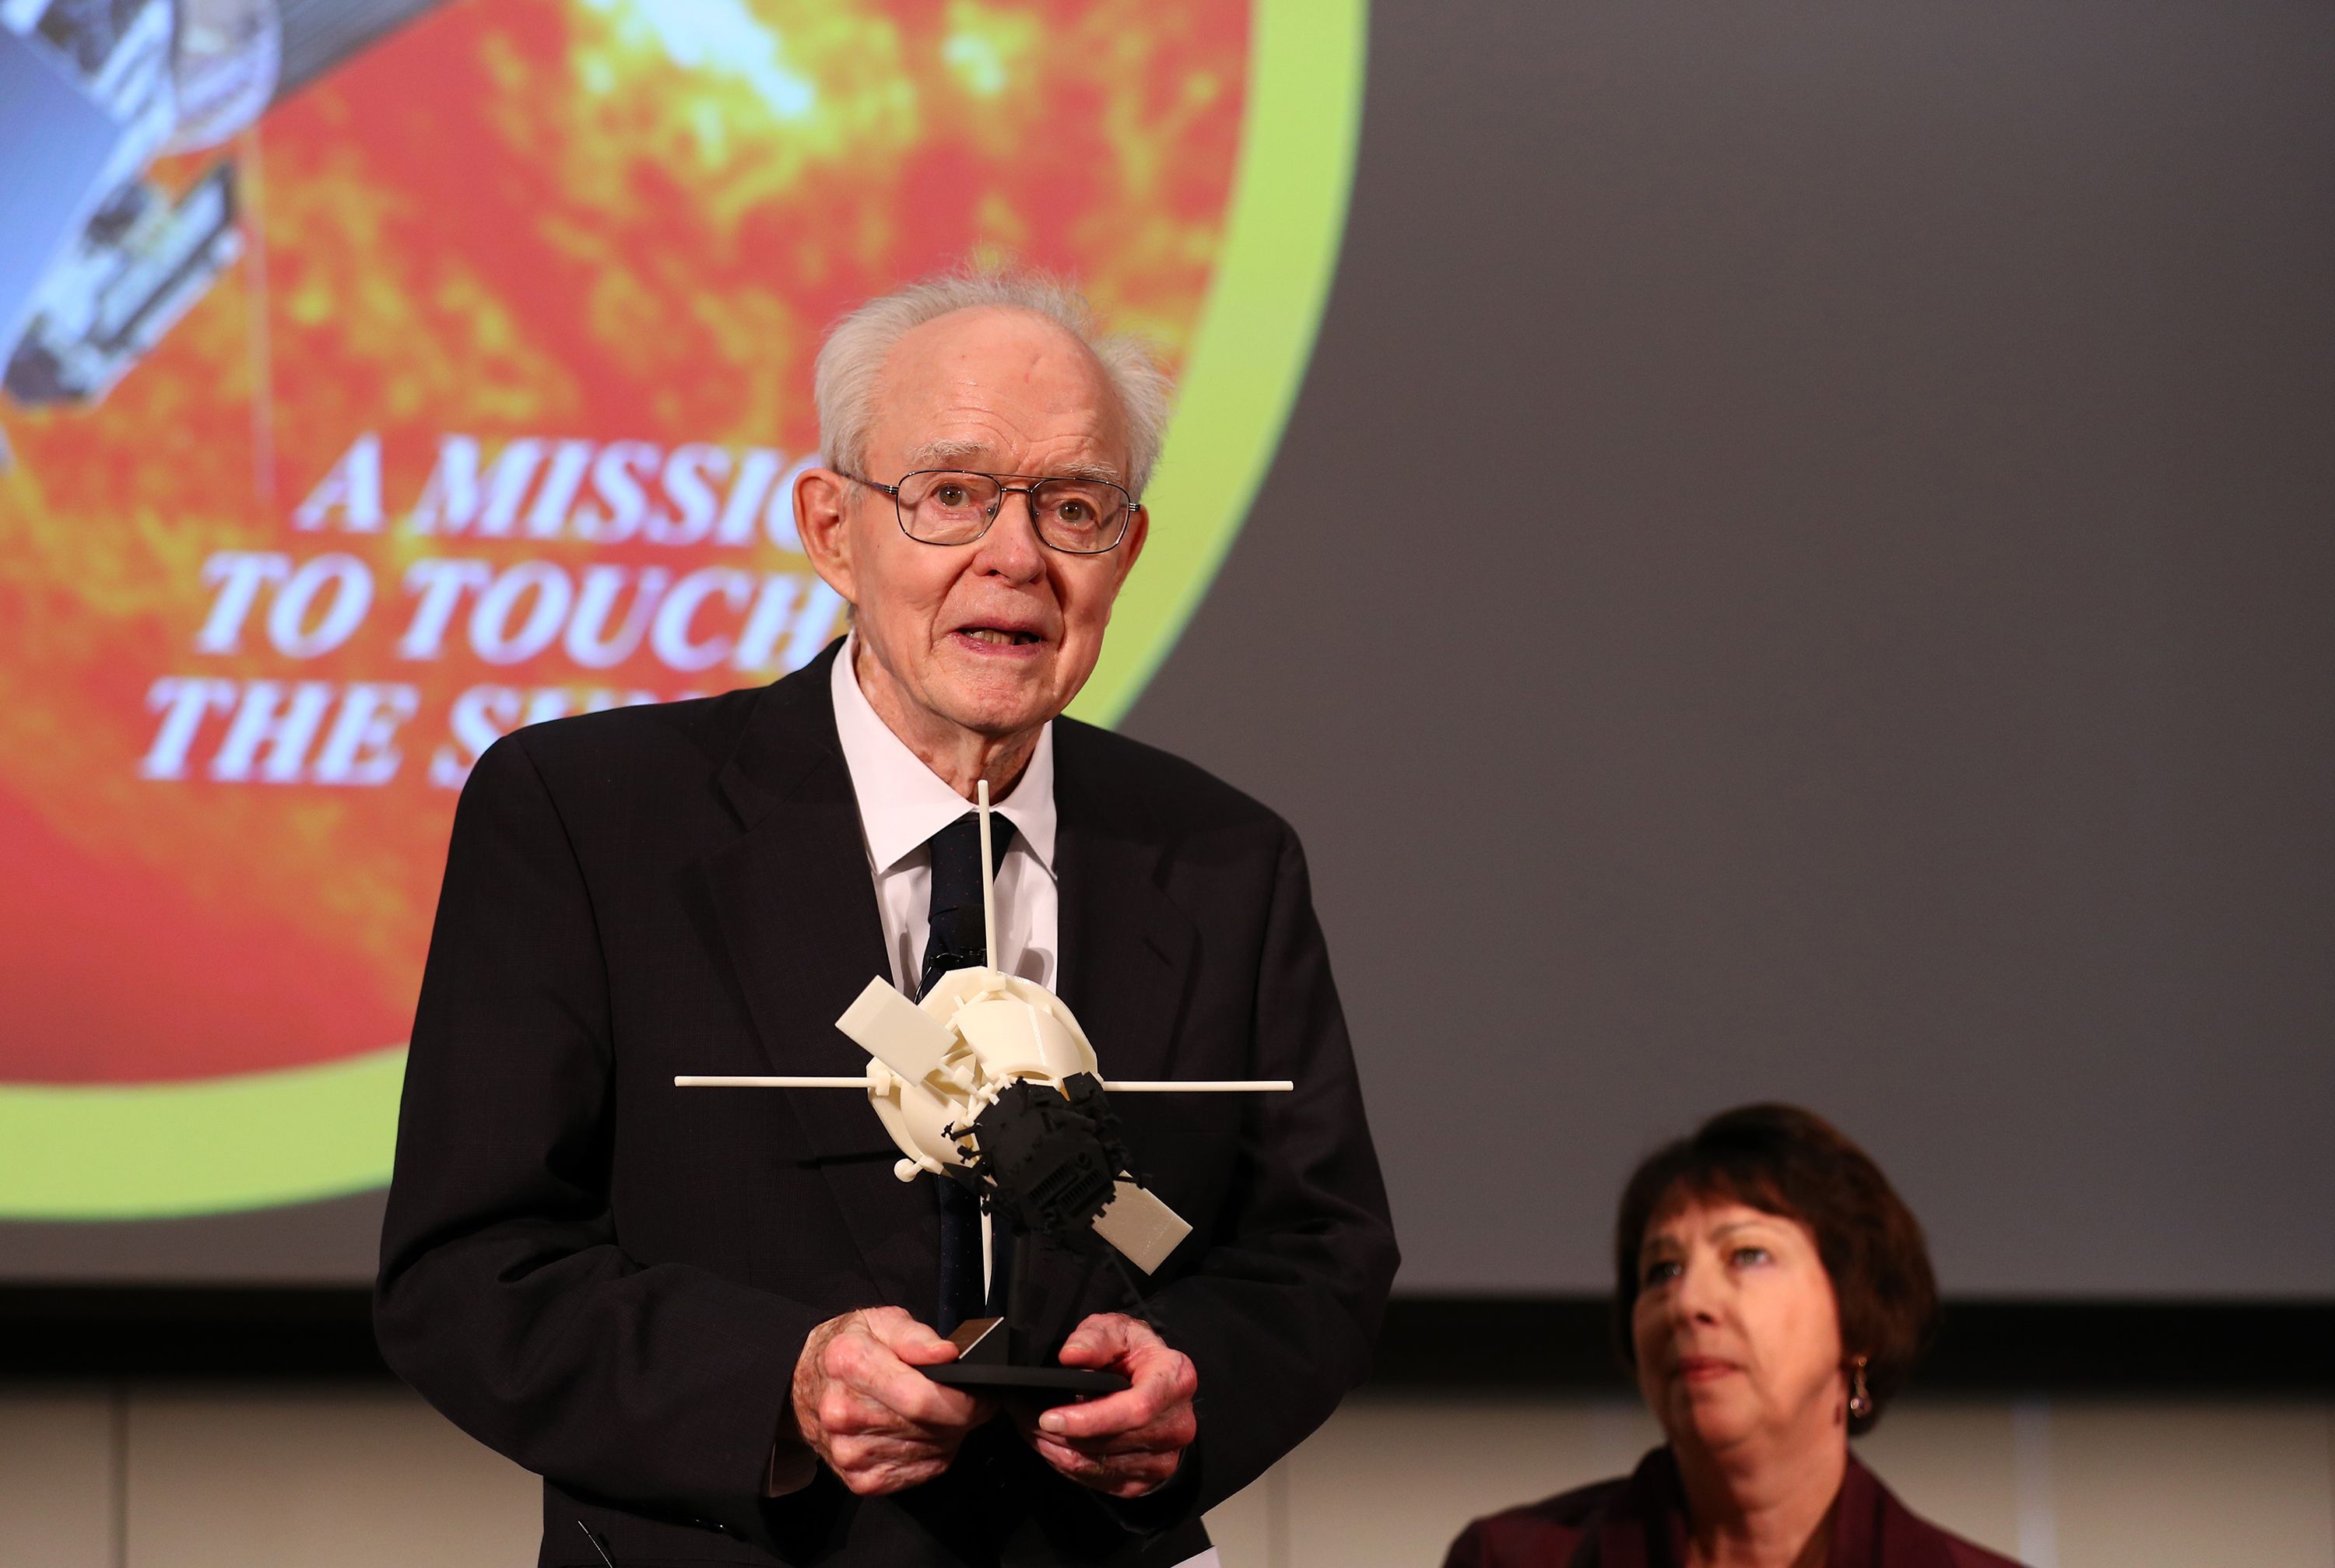 Eugene Parker, the pioneer behind the 'mission to touch the sun,' dies at 94 | CNN